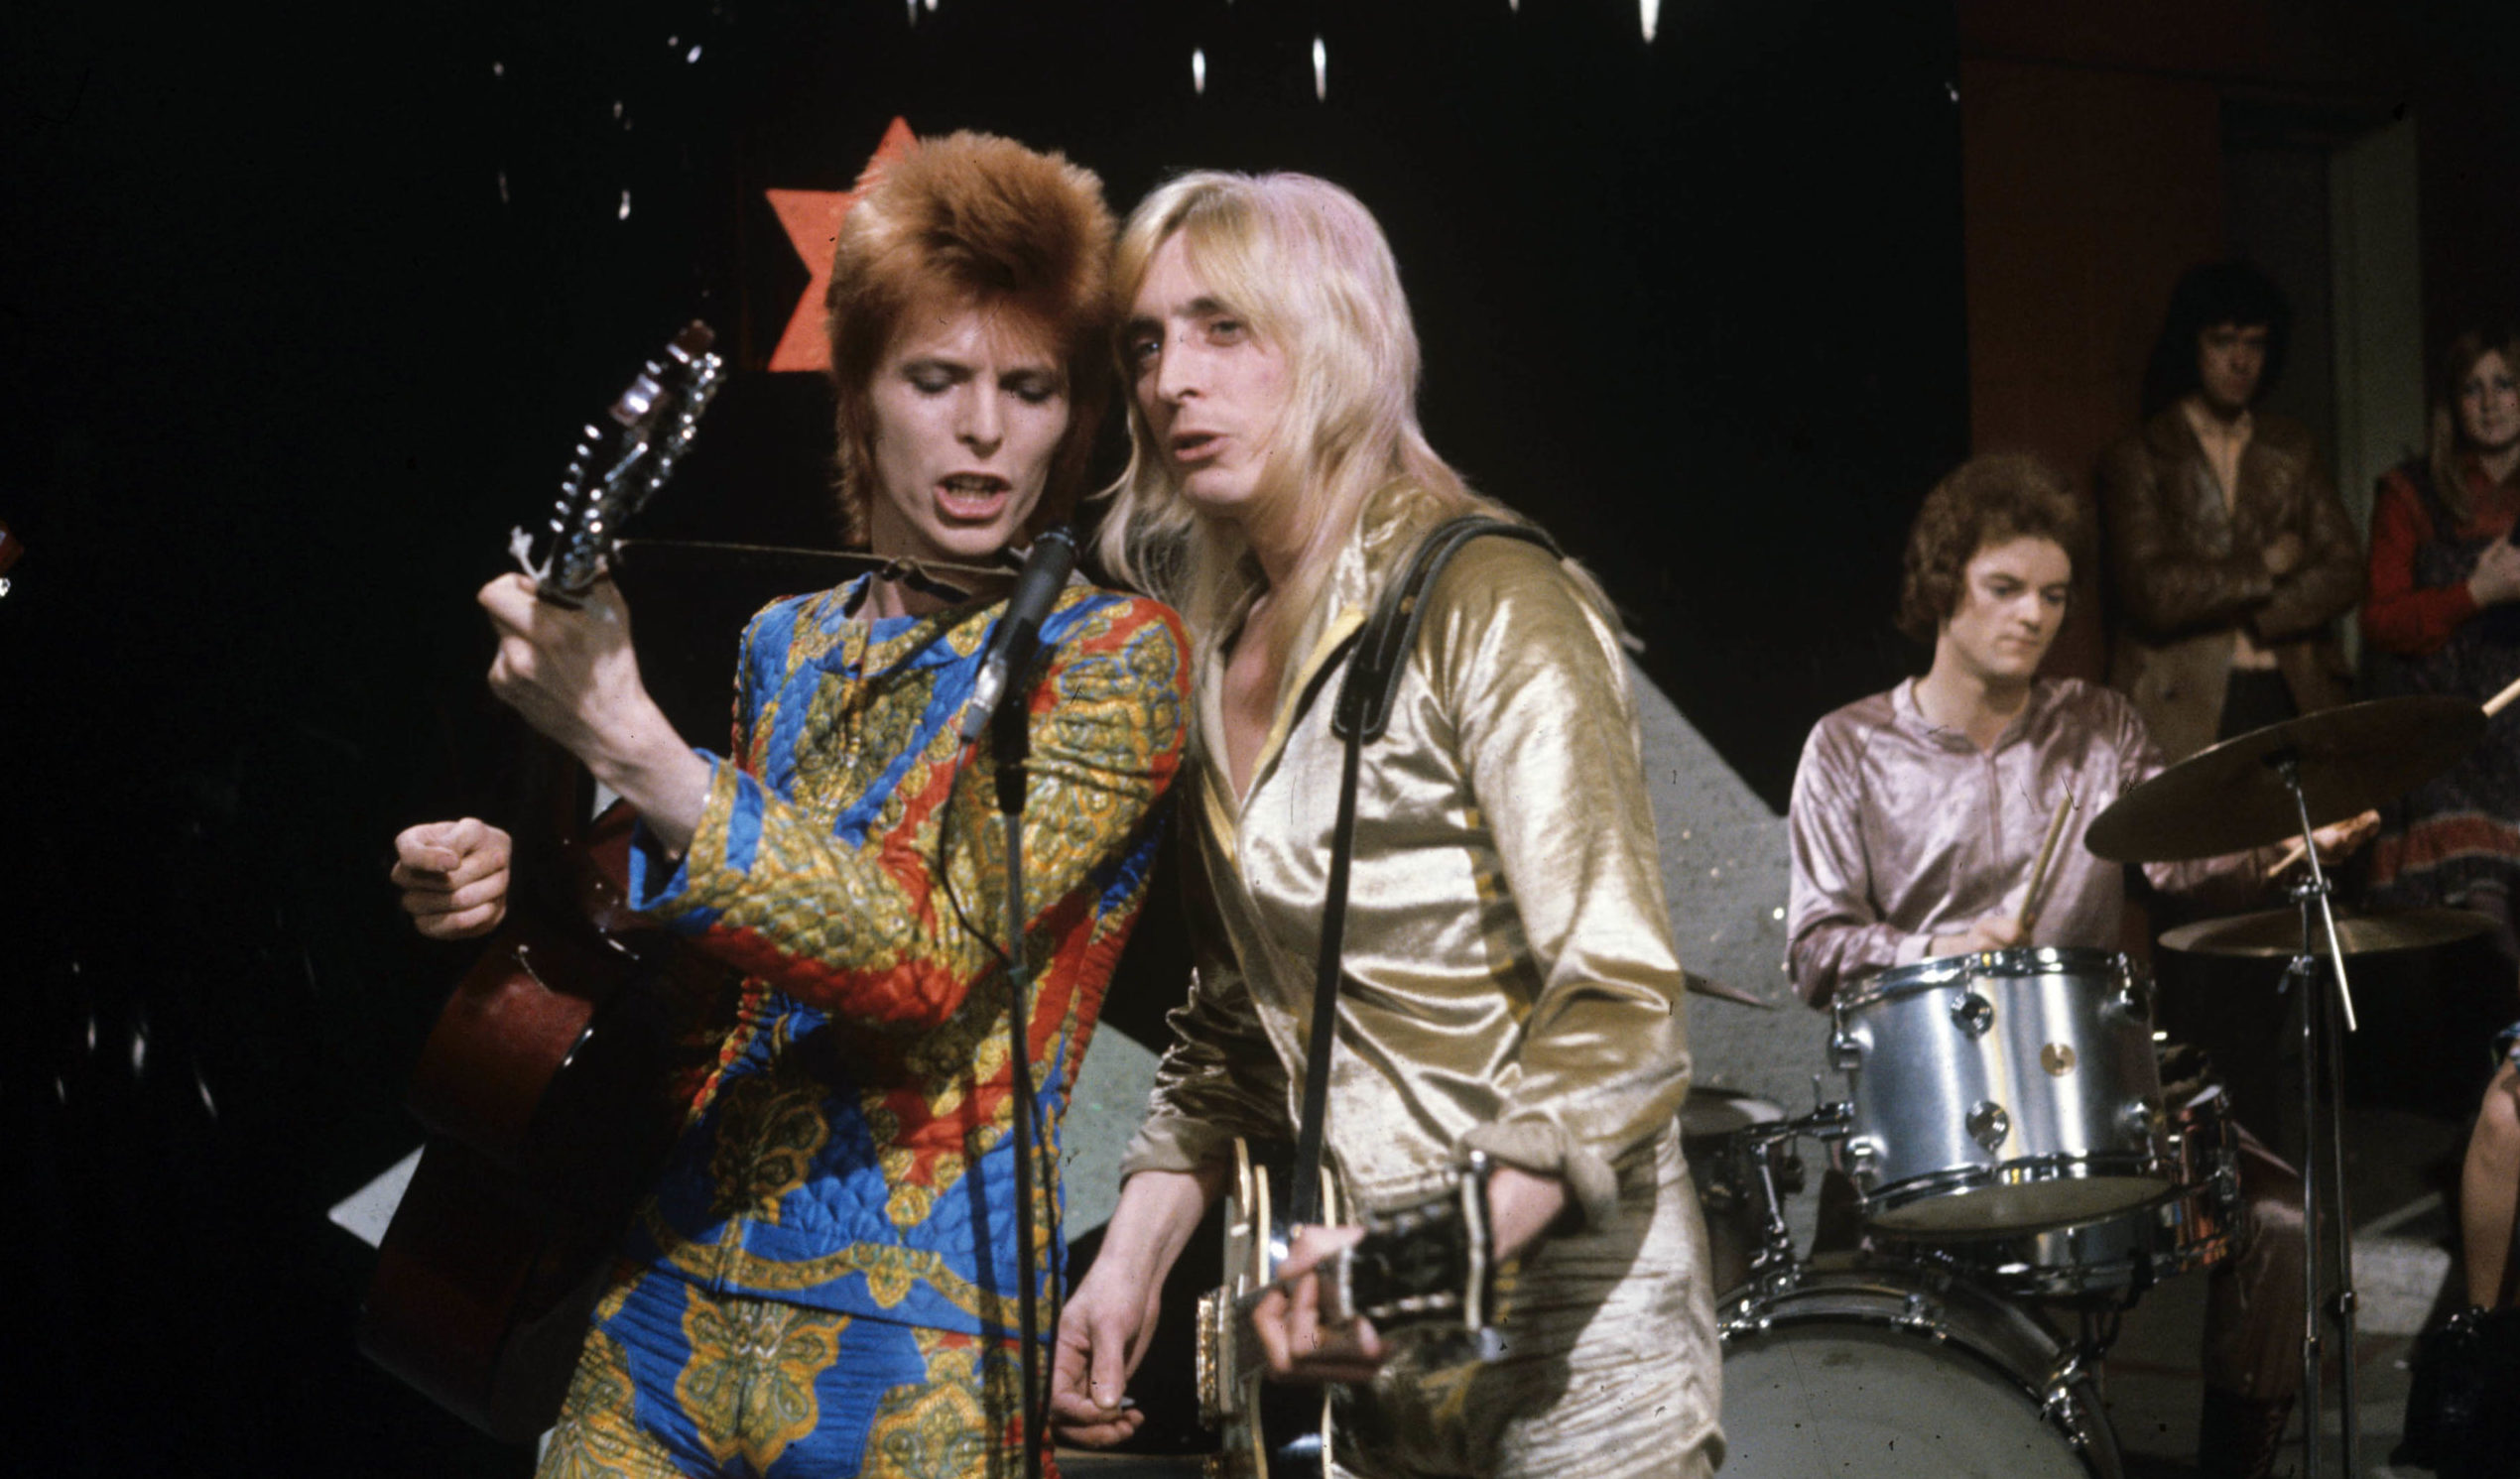 Mick “Woody” Woodmansey, drums, performing with David Bowie and Mick Ronson